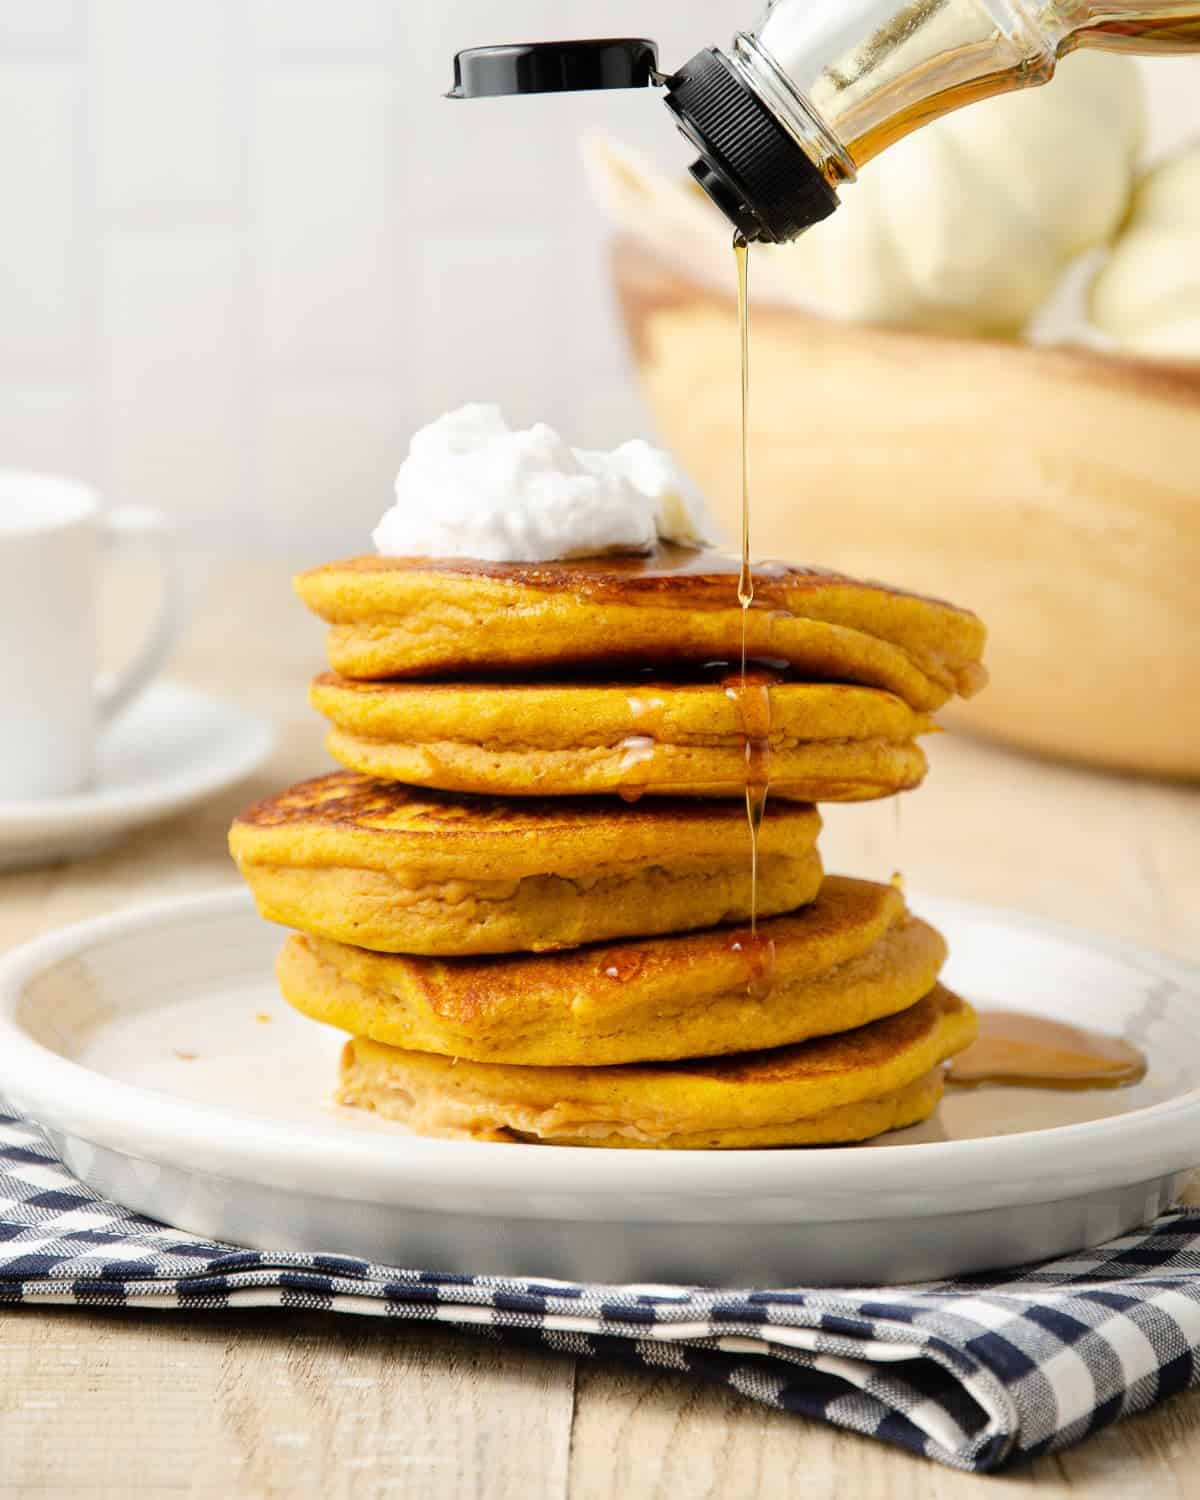 Pouring maple syrup on top of a stack of pancakes.